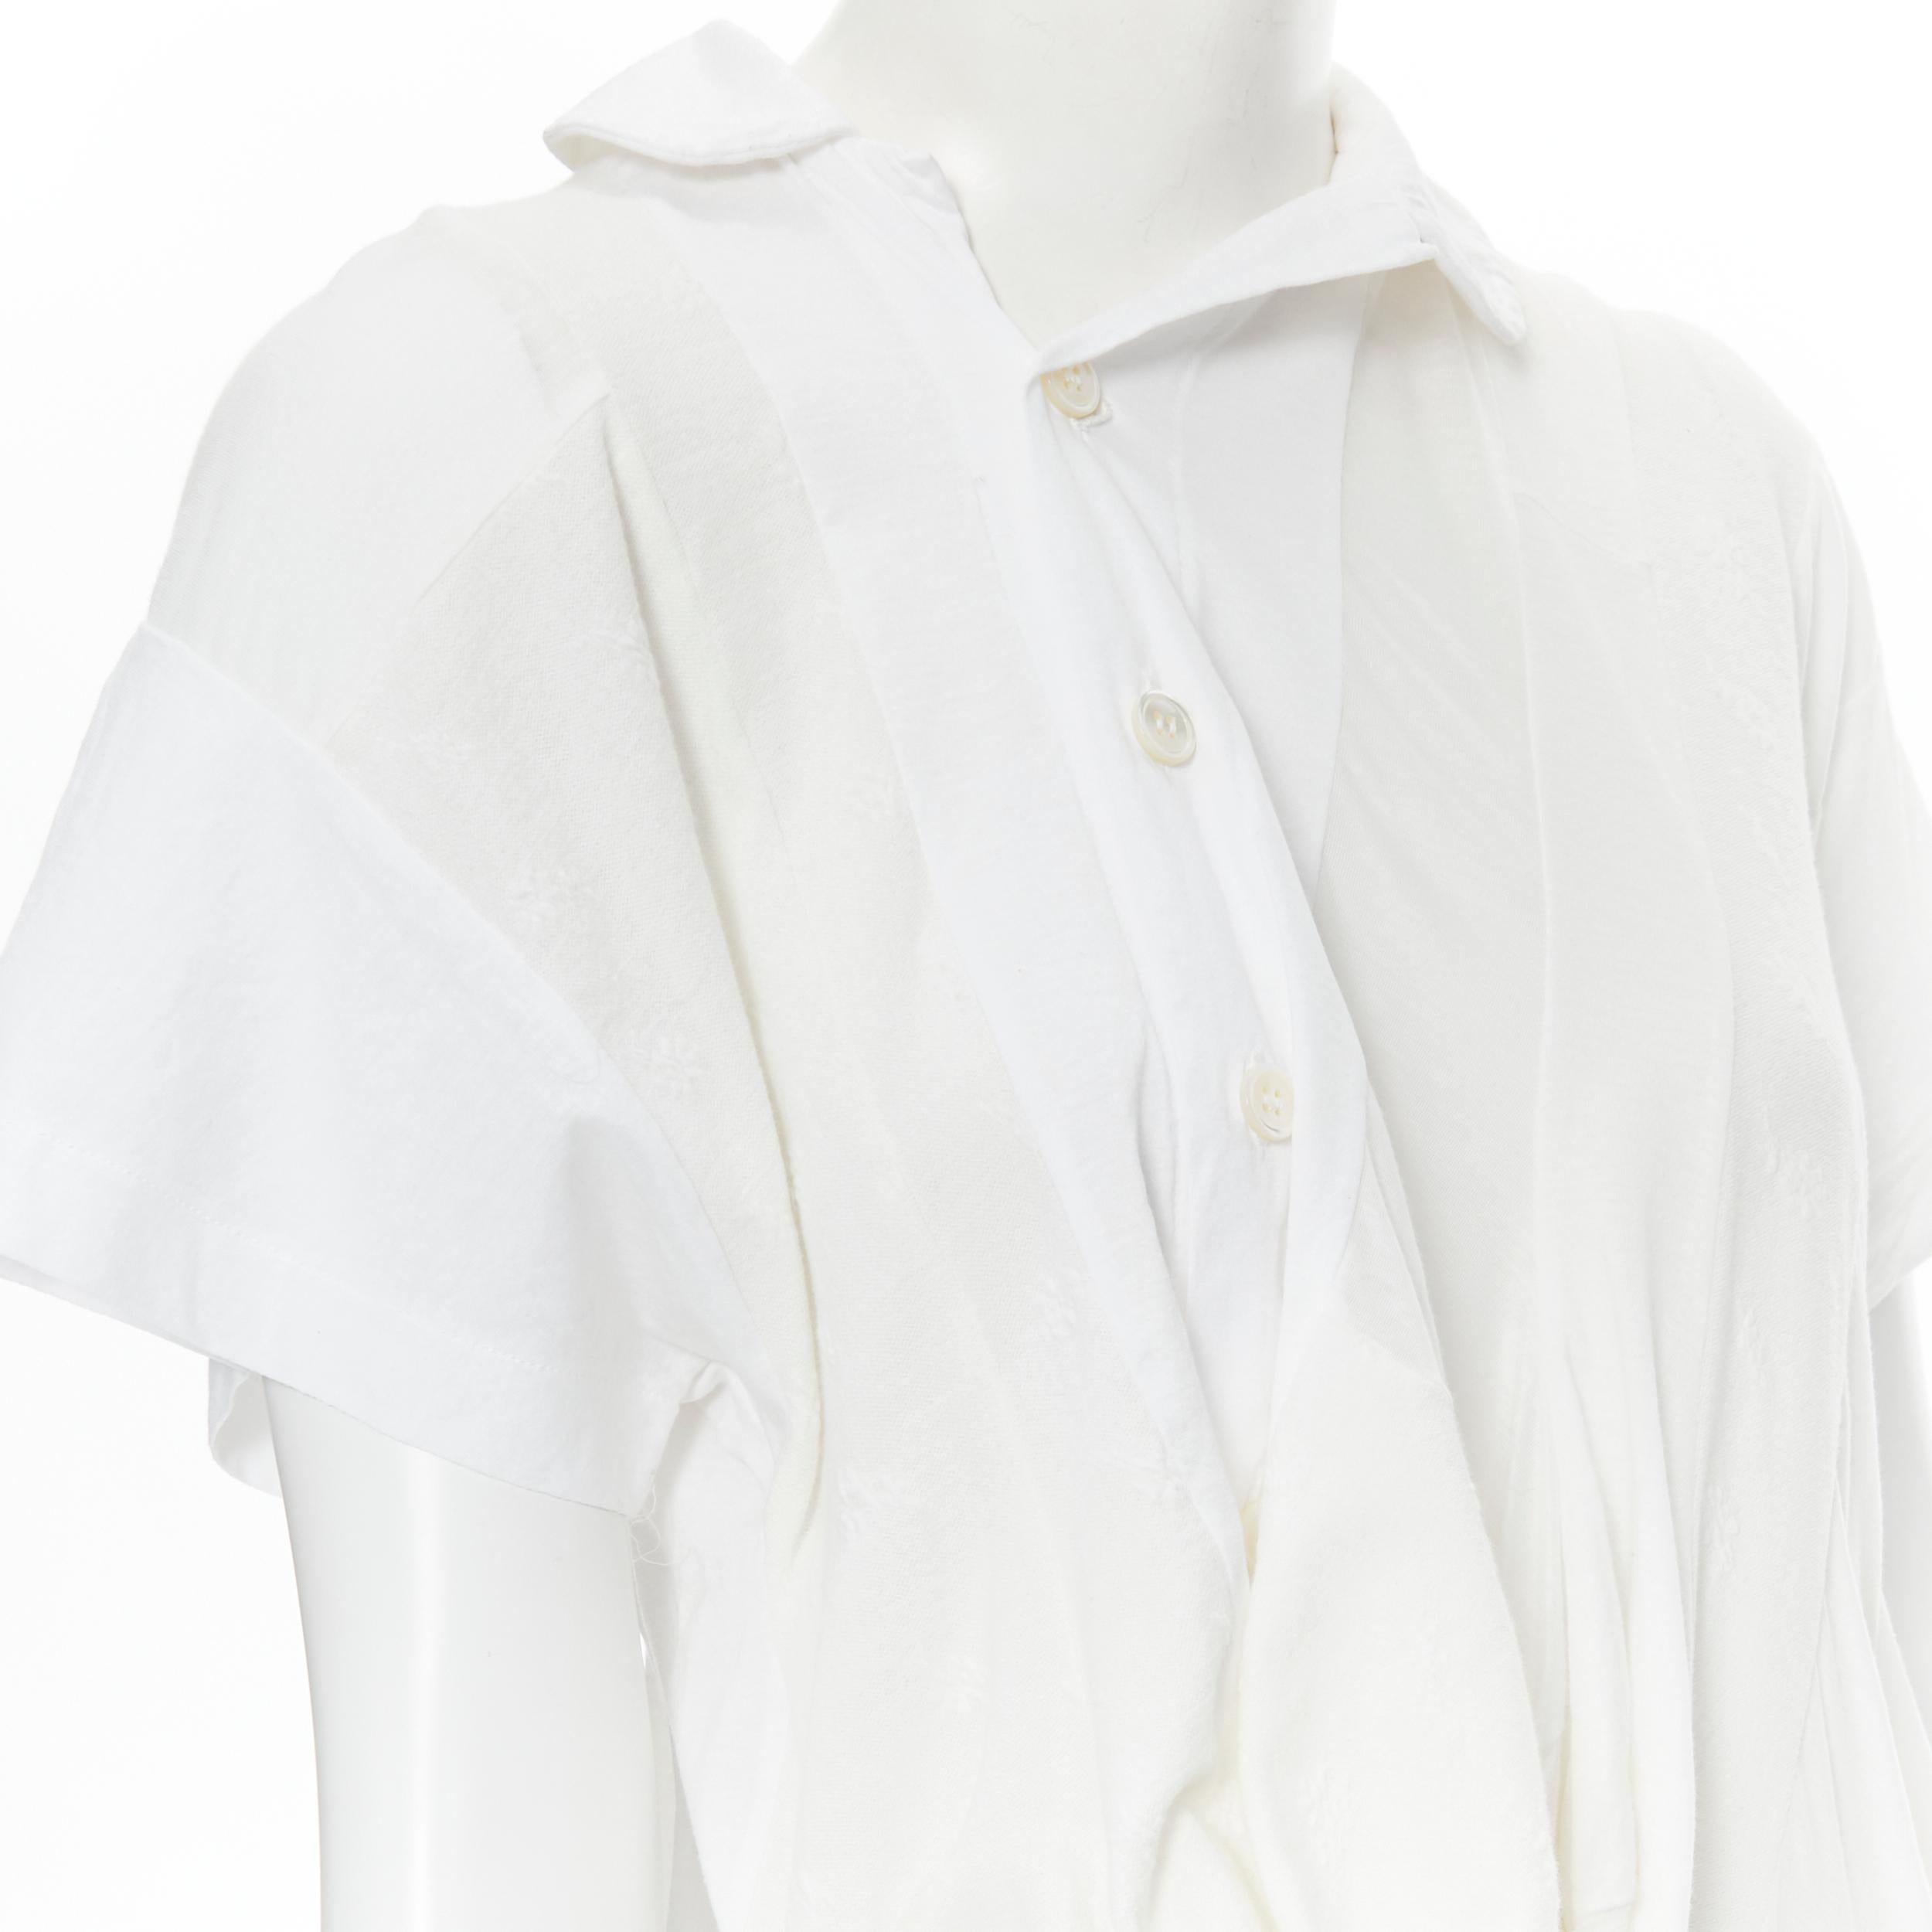 new TRICOT COMME DES GARCONS 2013 white patchwork deconstructed top M 
Reference: CRTI/A00289 
Brand: Comme Des Garcons Tricot 
Designer: Rei Kawakubo 
Material: Cotton 
Color: White 
Pattern: Solid 
Closure: Button 
Extra Detail: Mixed fabric